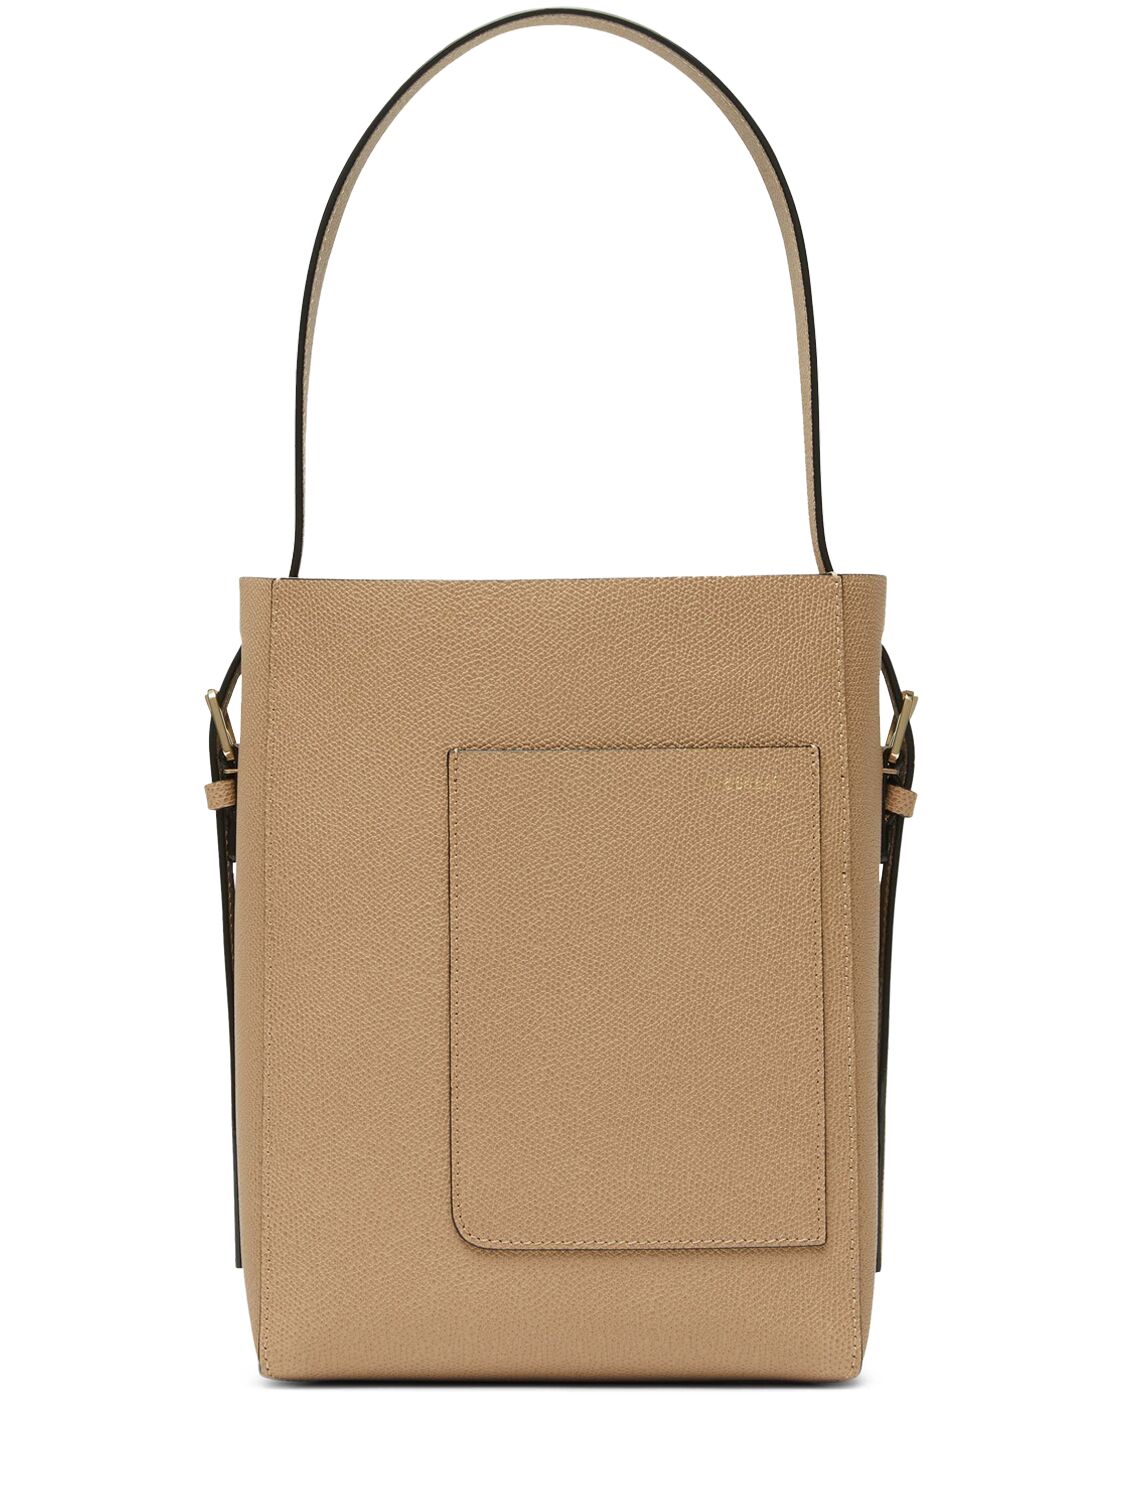 Valextra Small Bucket Soft Grain Leather Tote Bag In Beige Cachemire